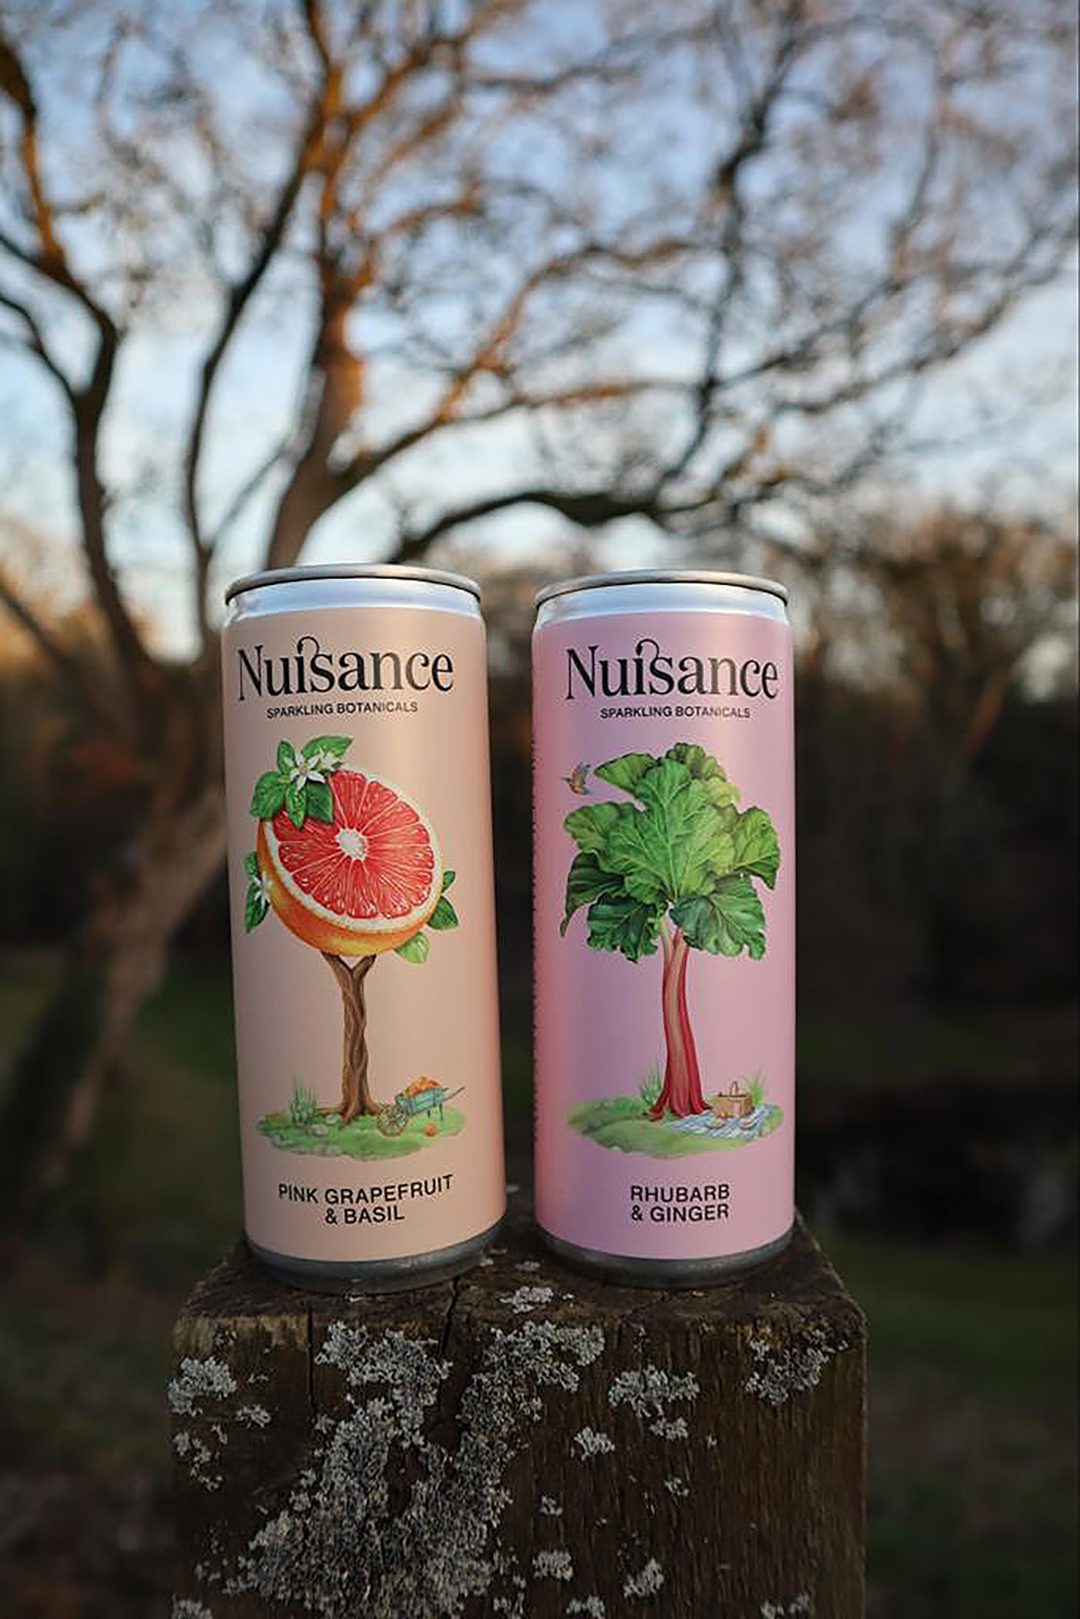 Nuisance Drinks latest releases Pink Grapefruit & Basil and Rhubarb & Ginger